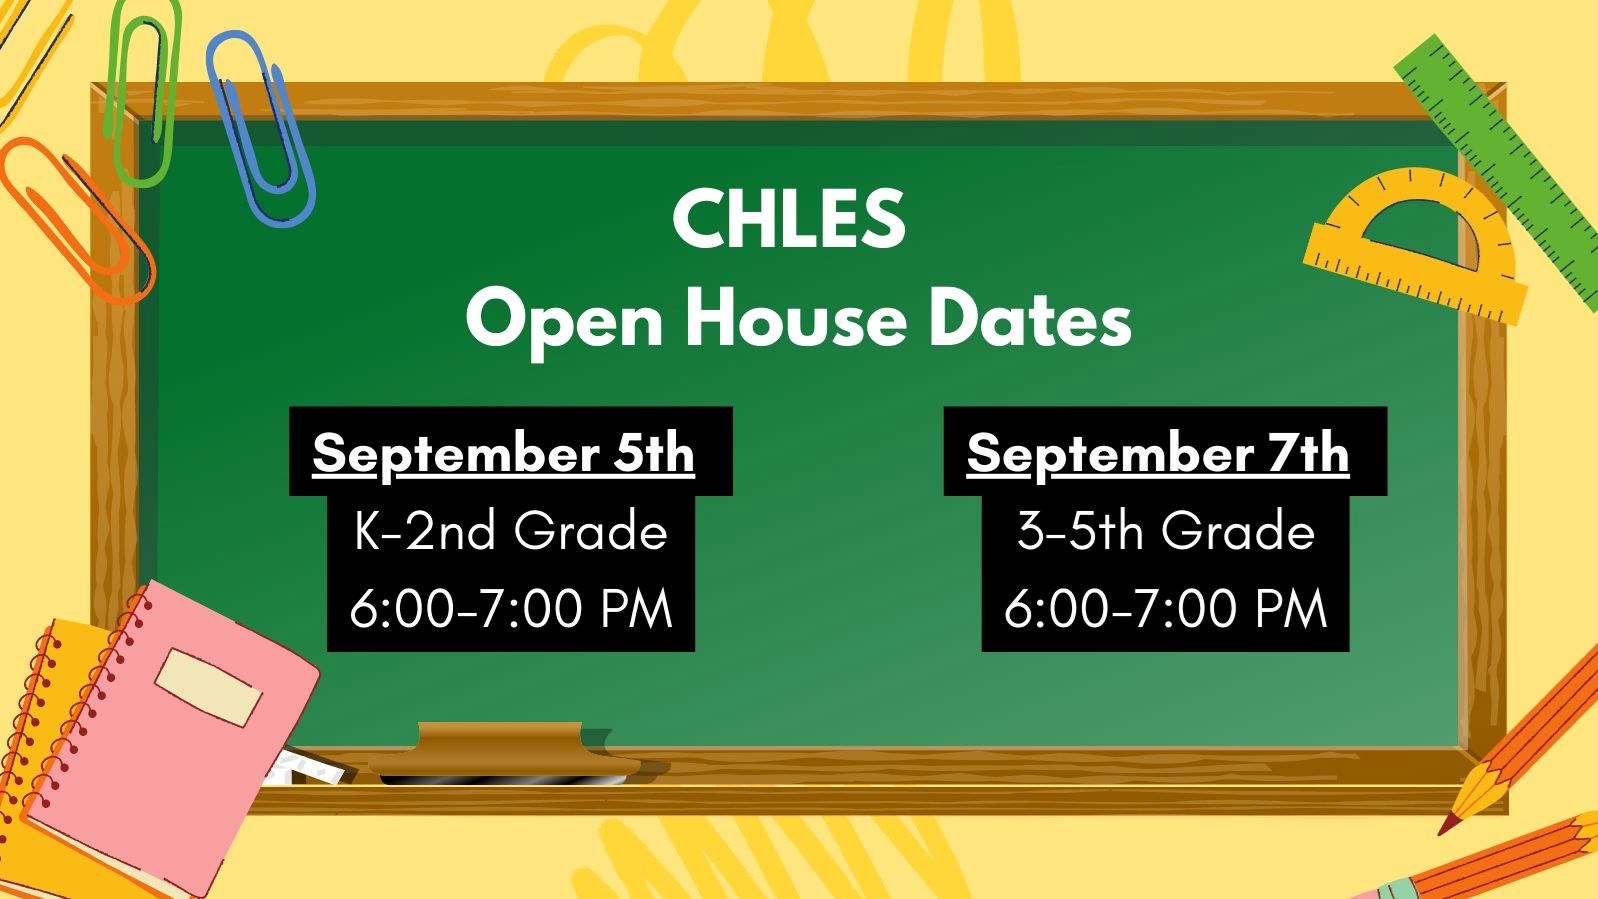 CHLES Open House Dates